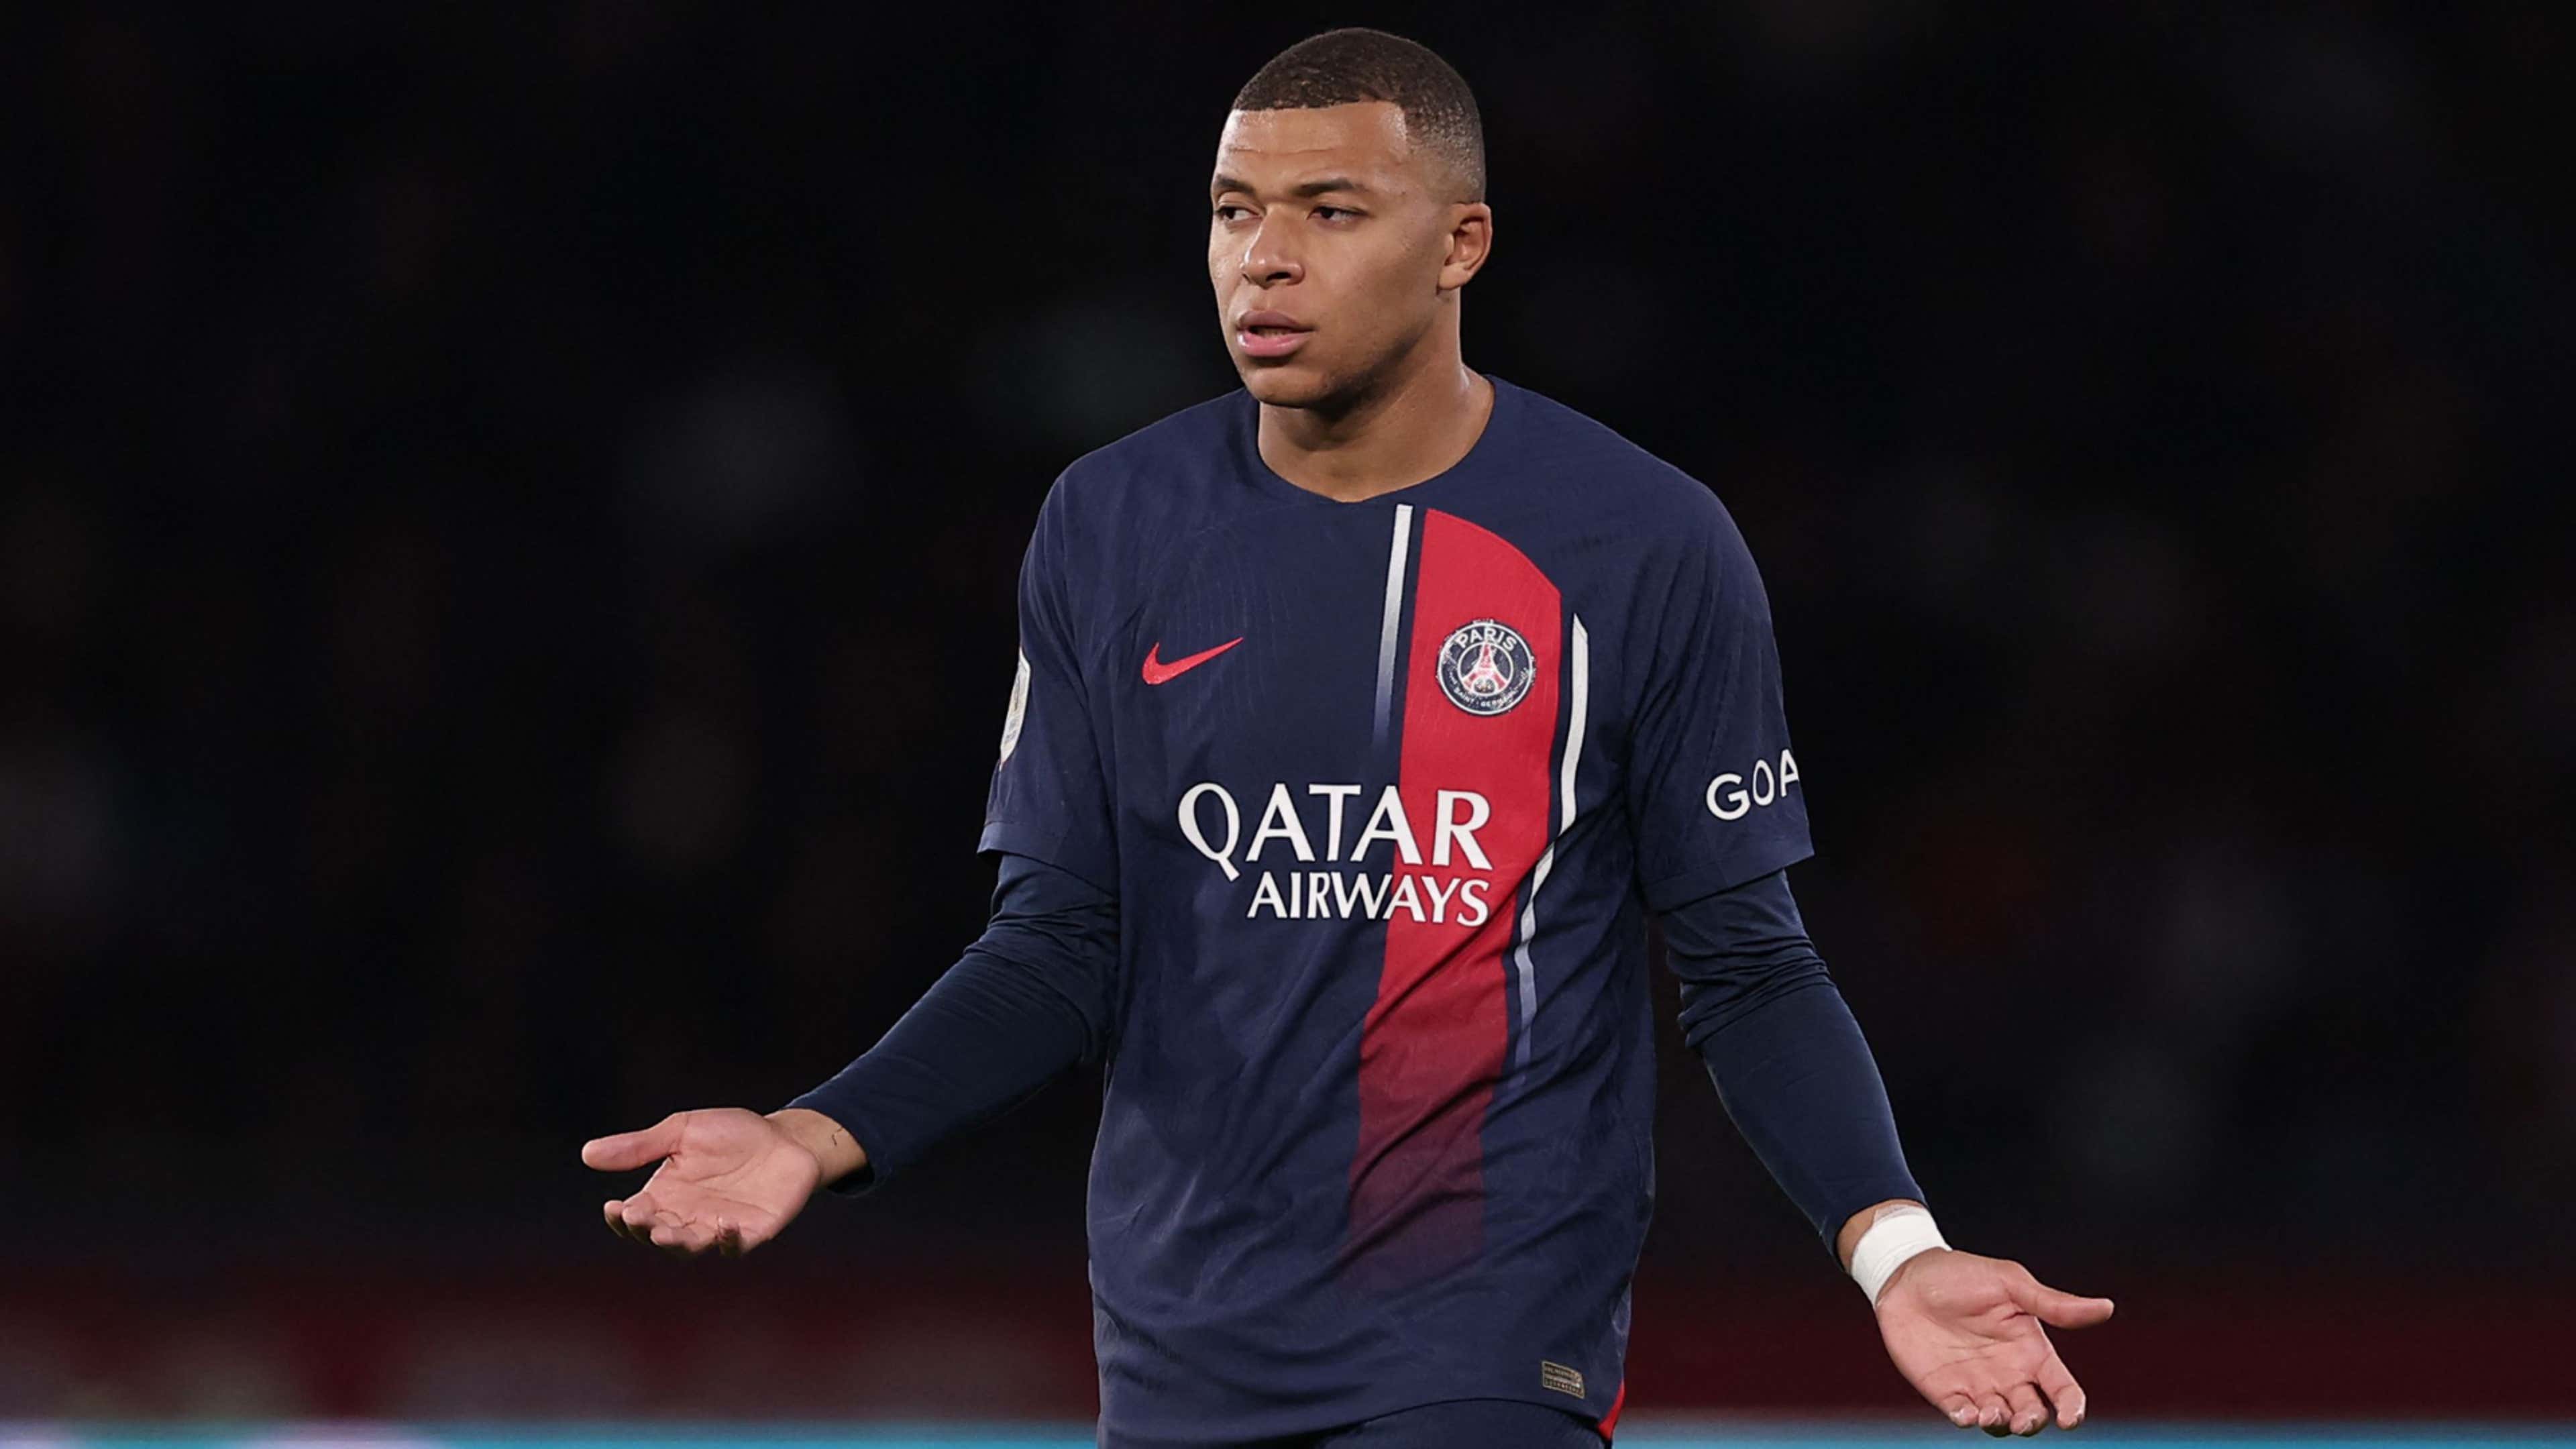 Revealed: Kylian Mbappe has 'many doubts' over Real Madrid transfer with PSG  expecting final decision from star forward in 'coming days' as they hold  back new contract offer